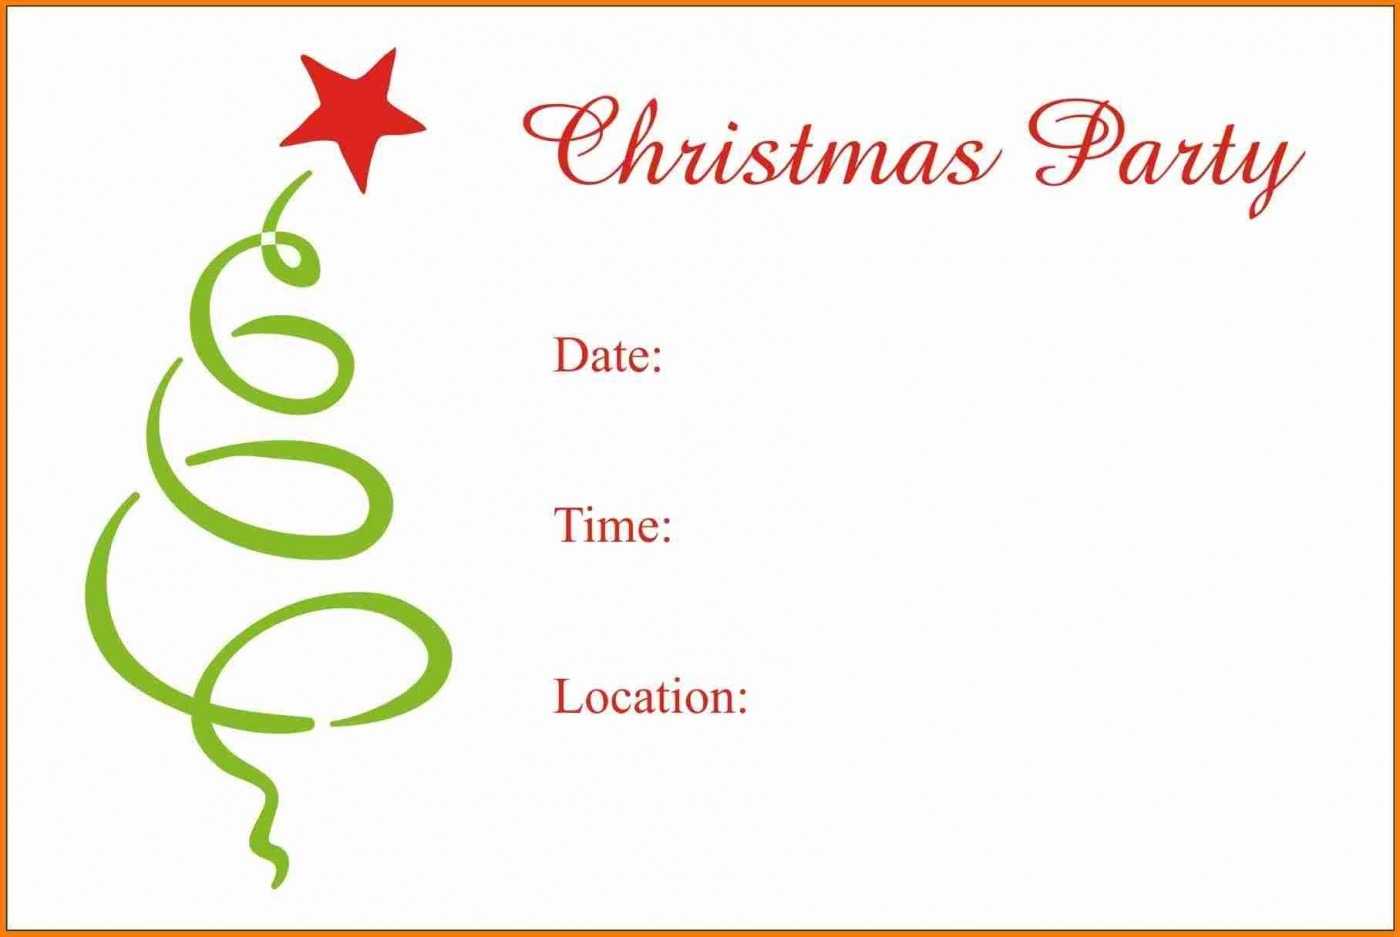 Children's Christmas Party Invitation Templates Free Intended For Free Christmas Invitation Templates For Word